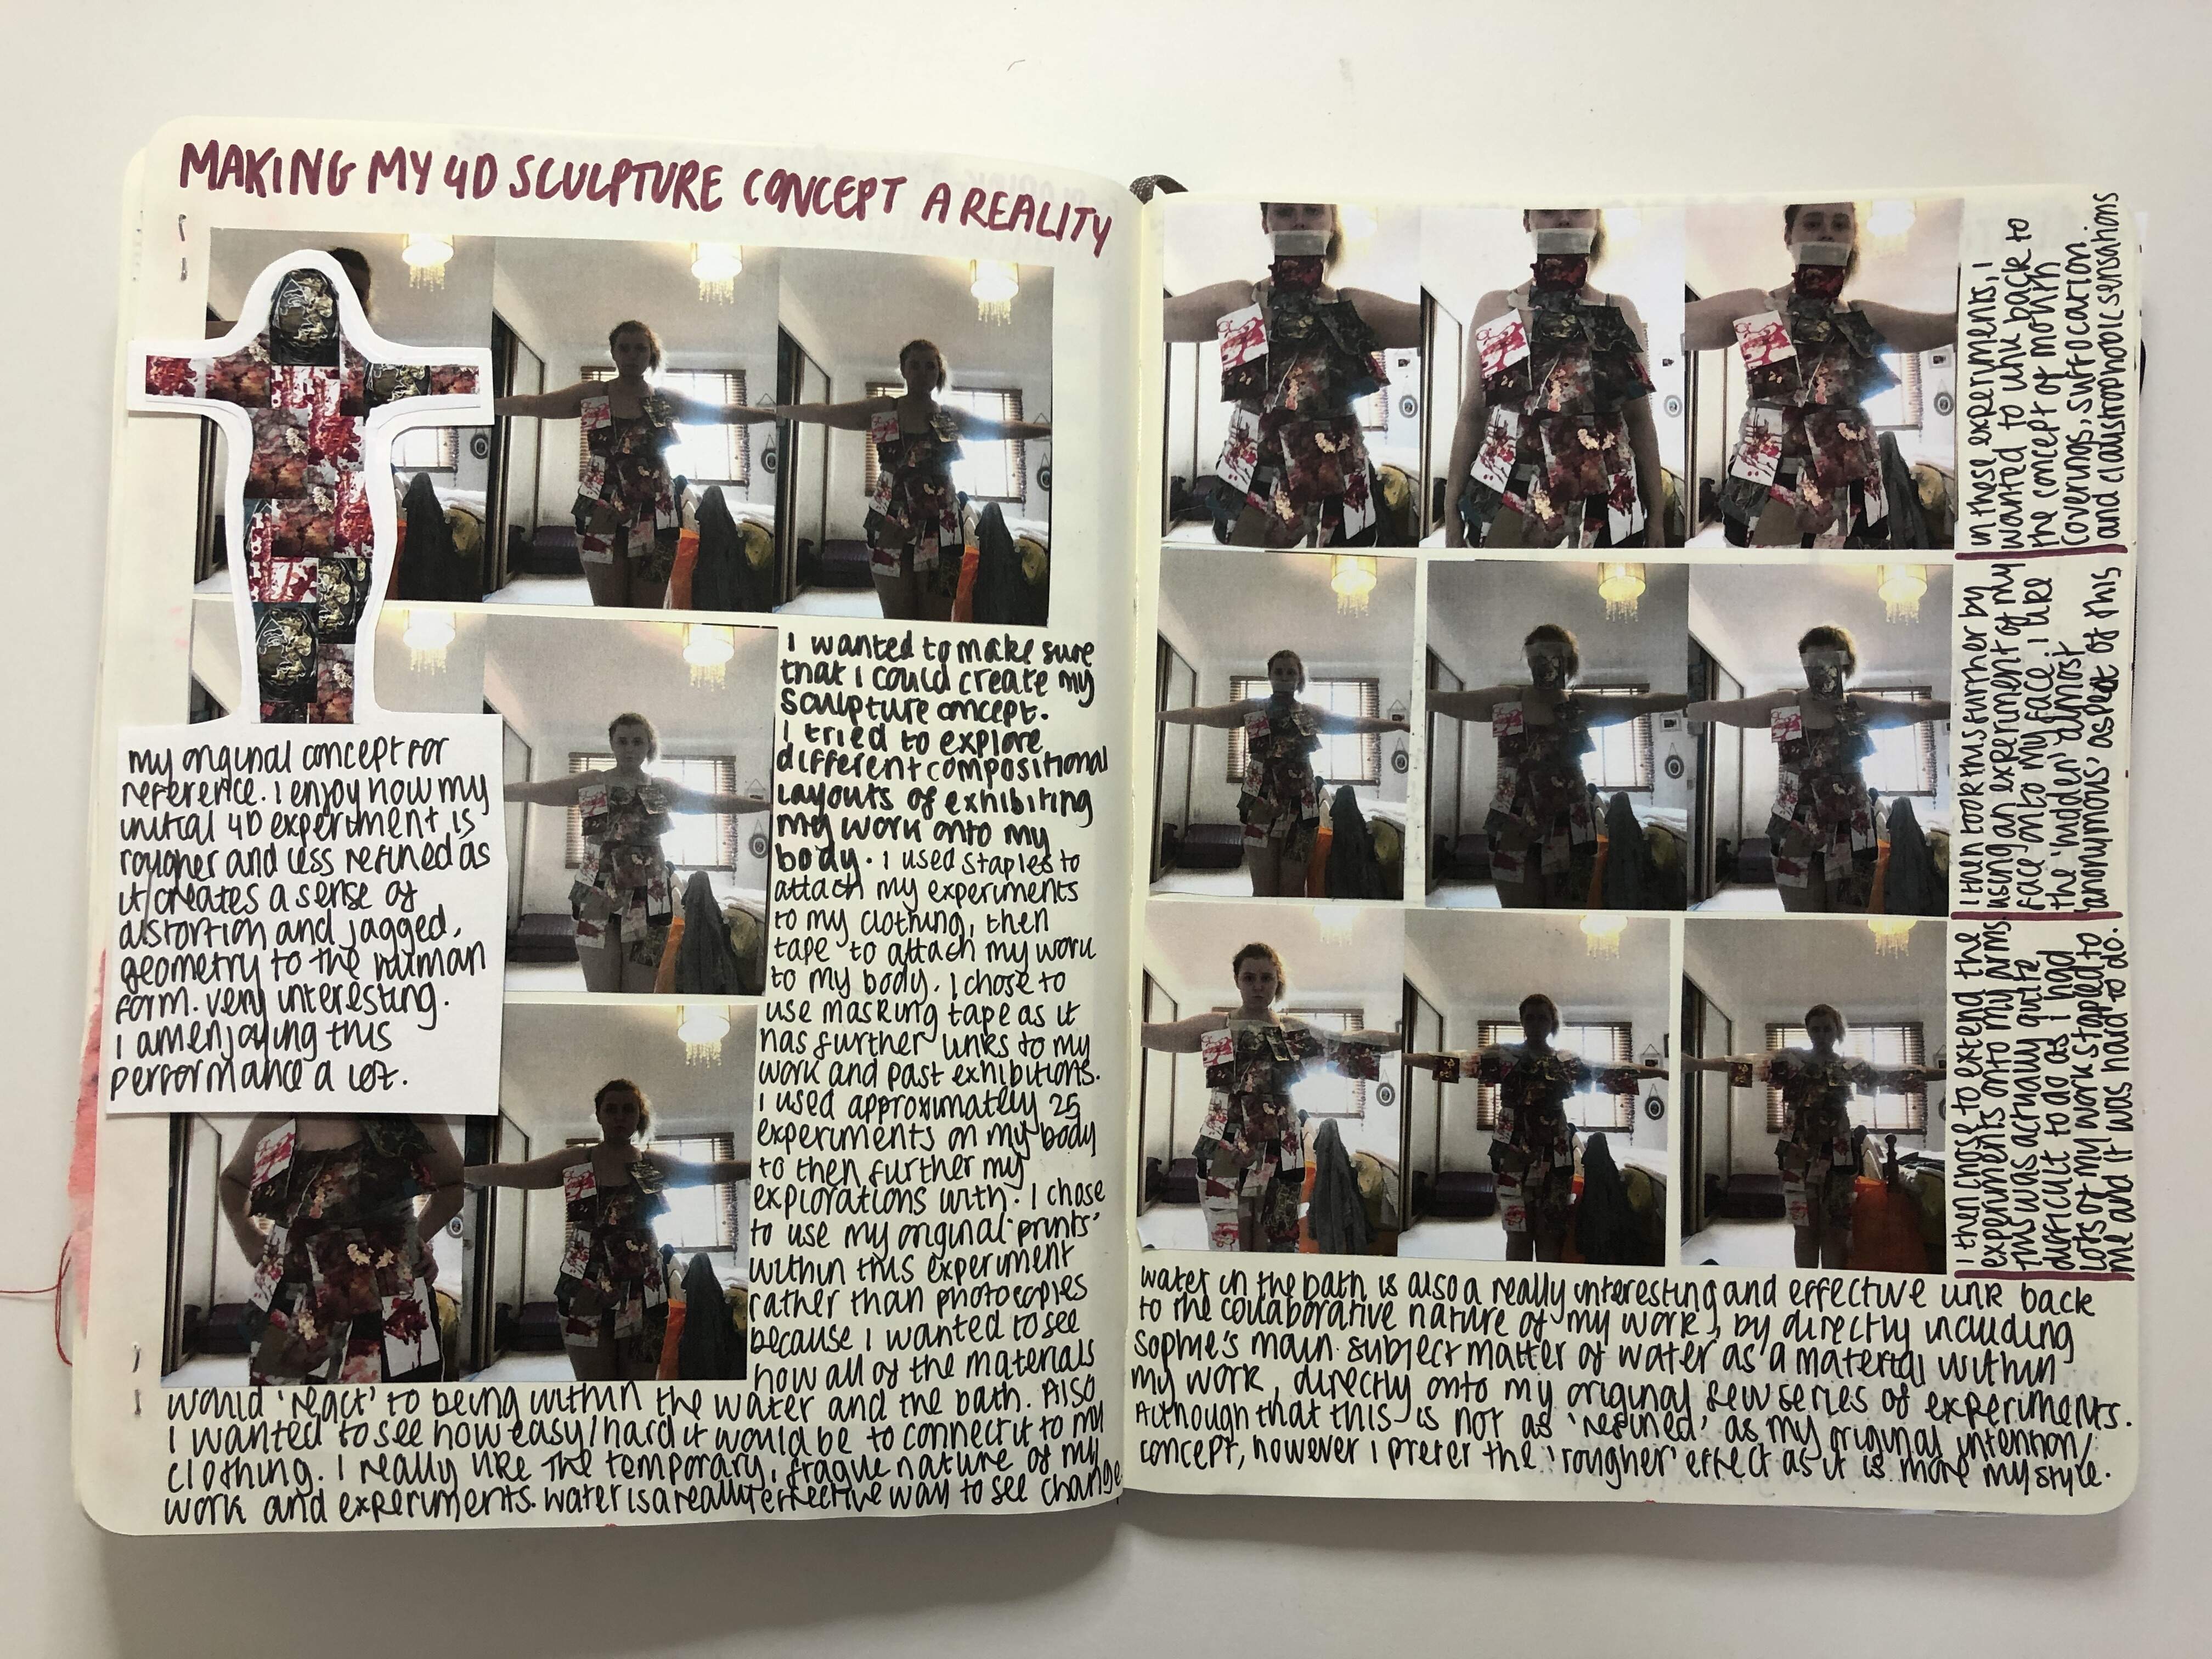 A sketchbook page depicting the documentation of my performance piece Narrative